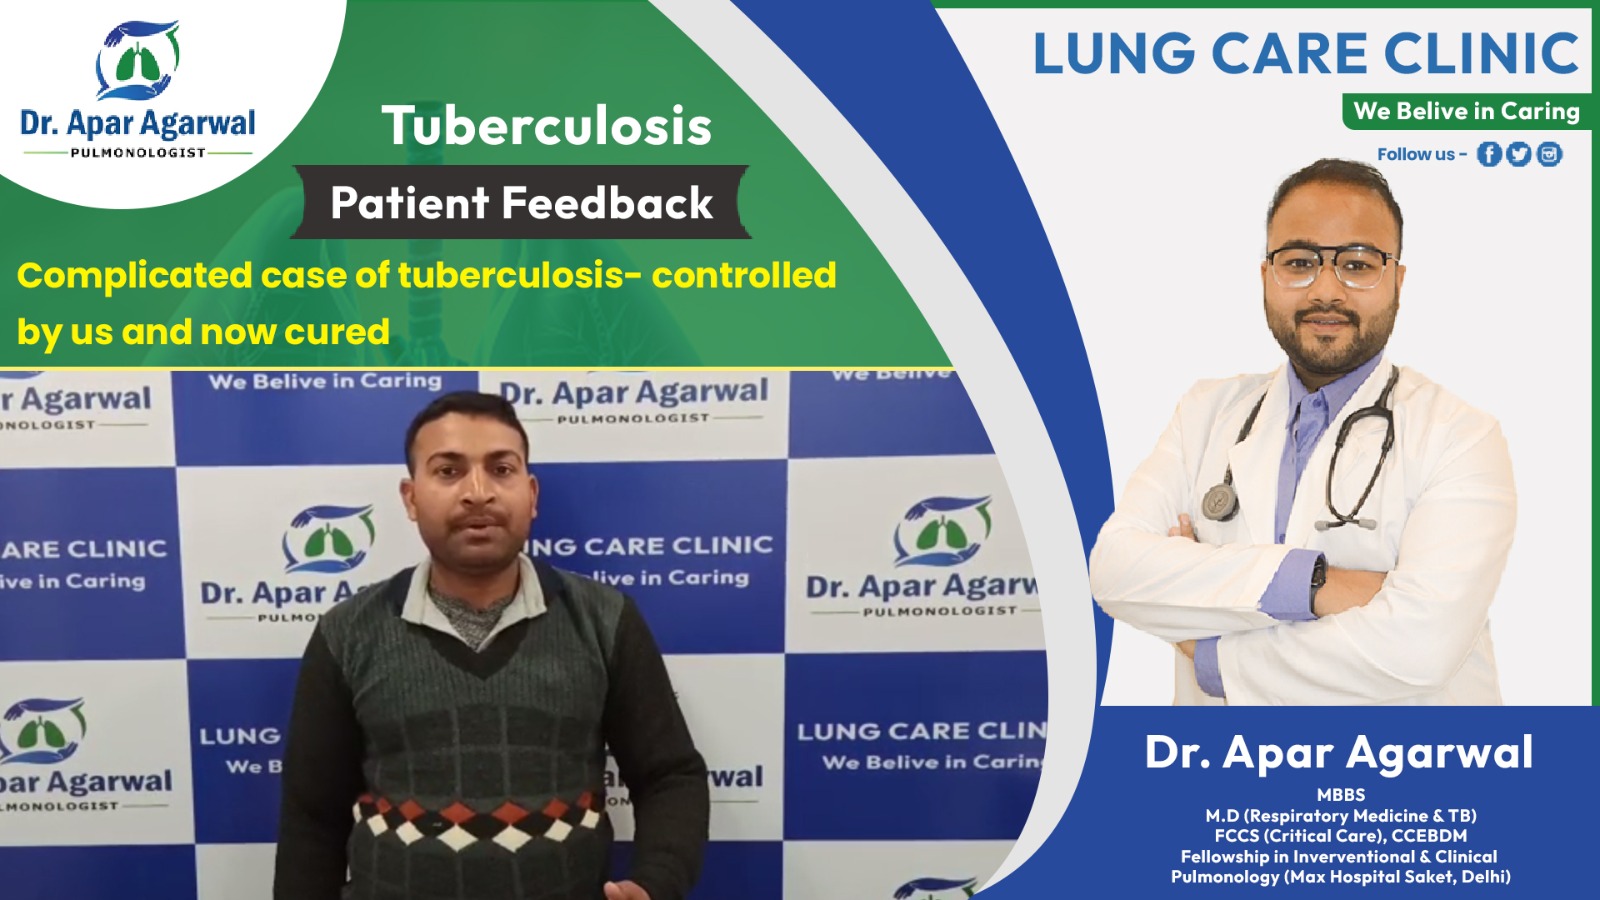 Tuberculosis Patient Feedback Complicate case of tuberculosis - controlled by as and now cured.